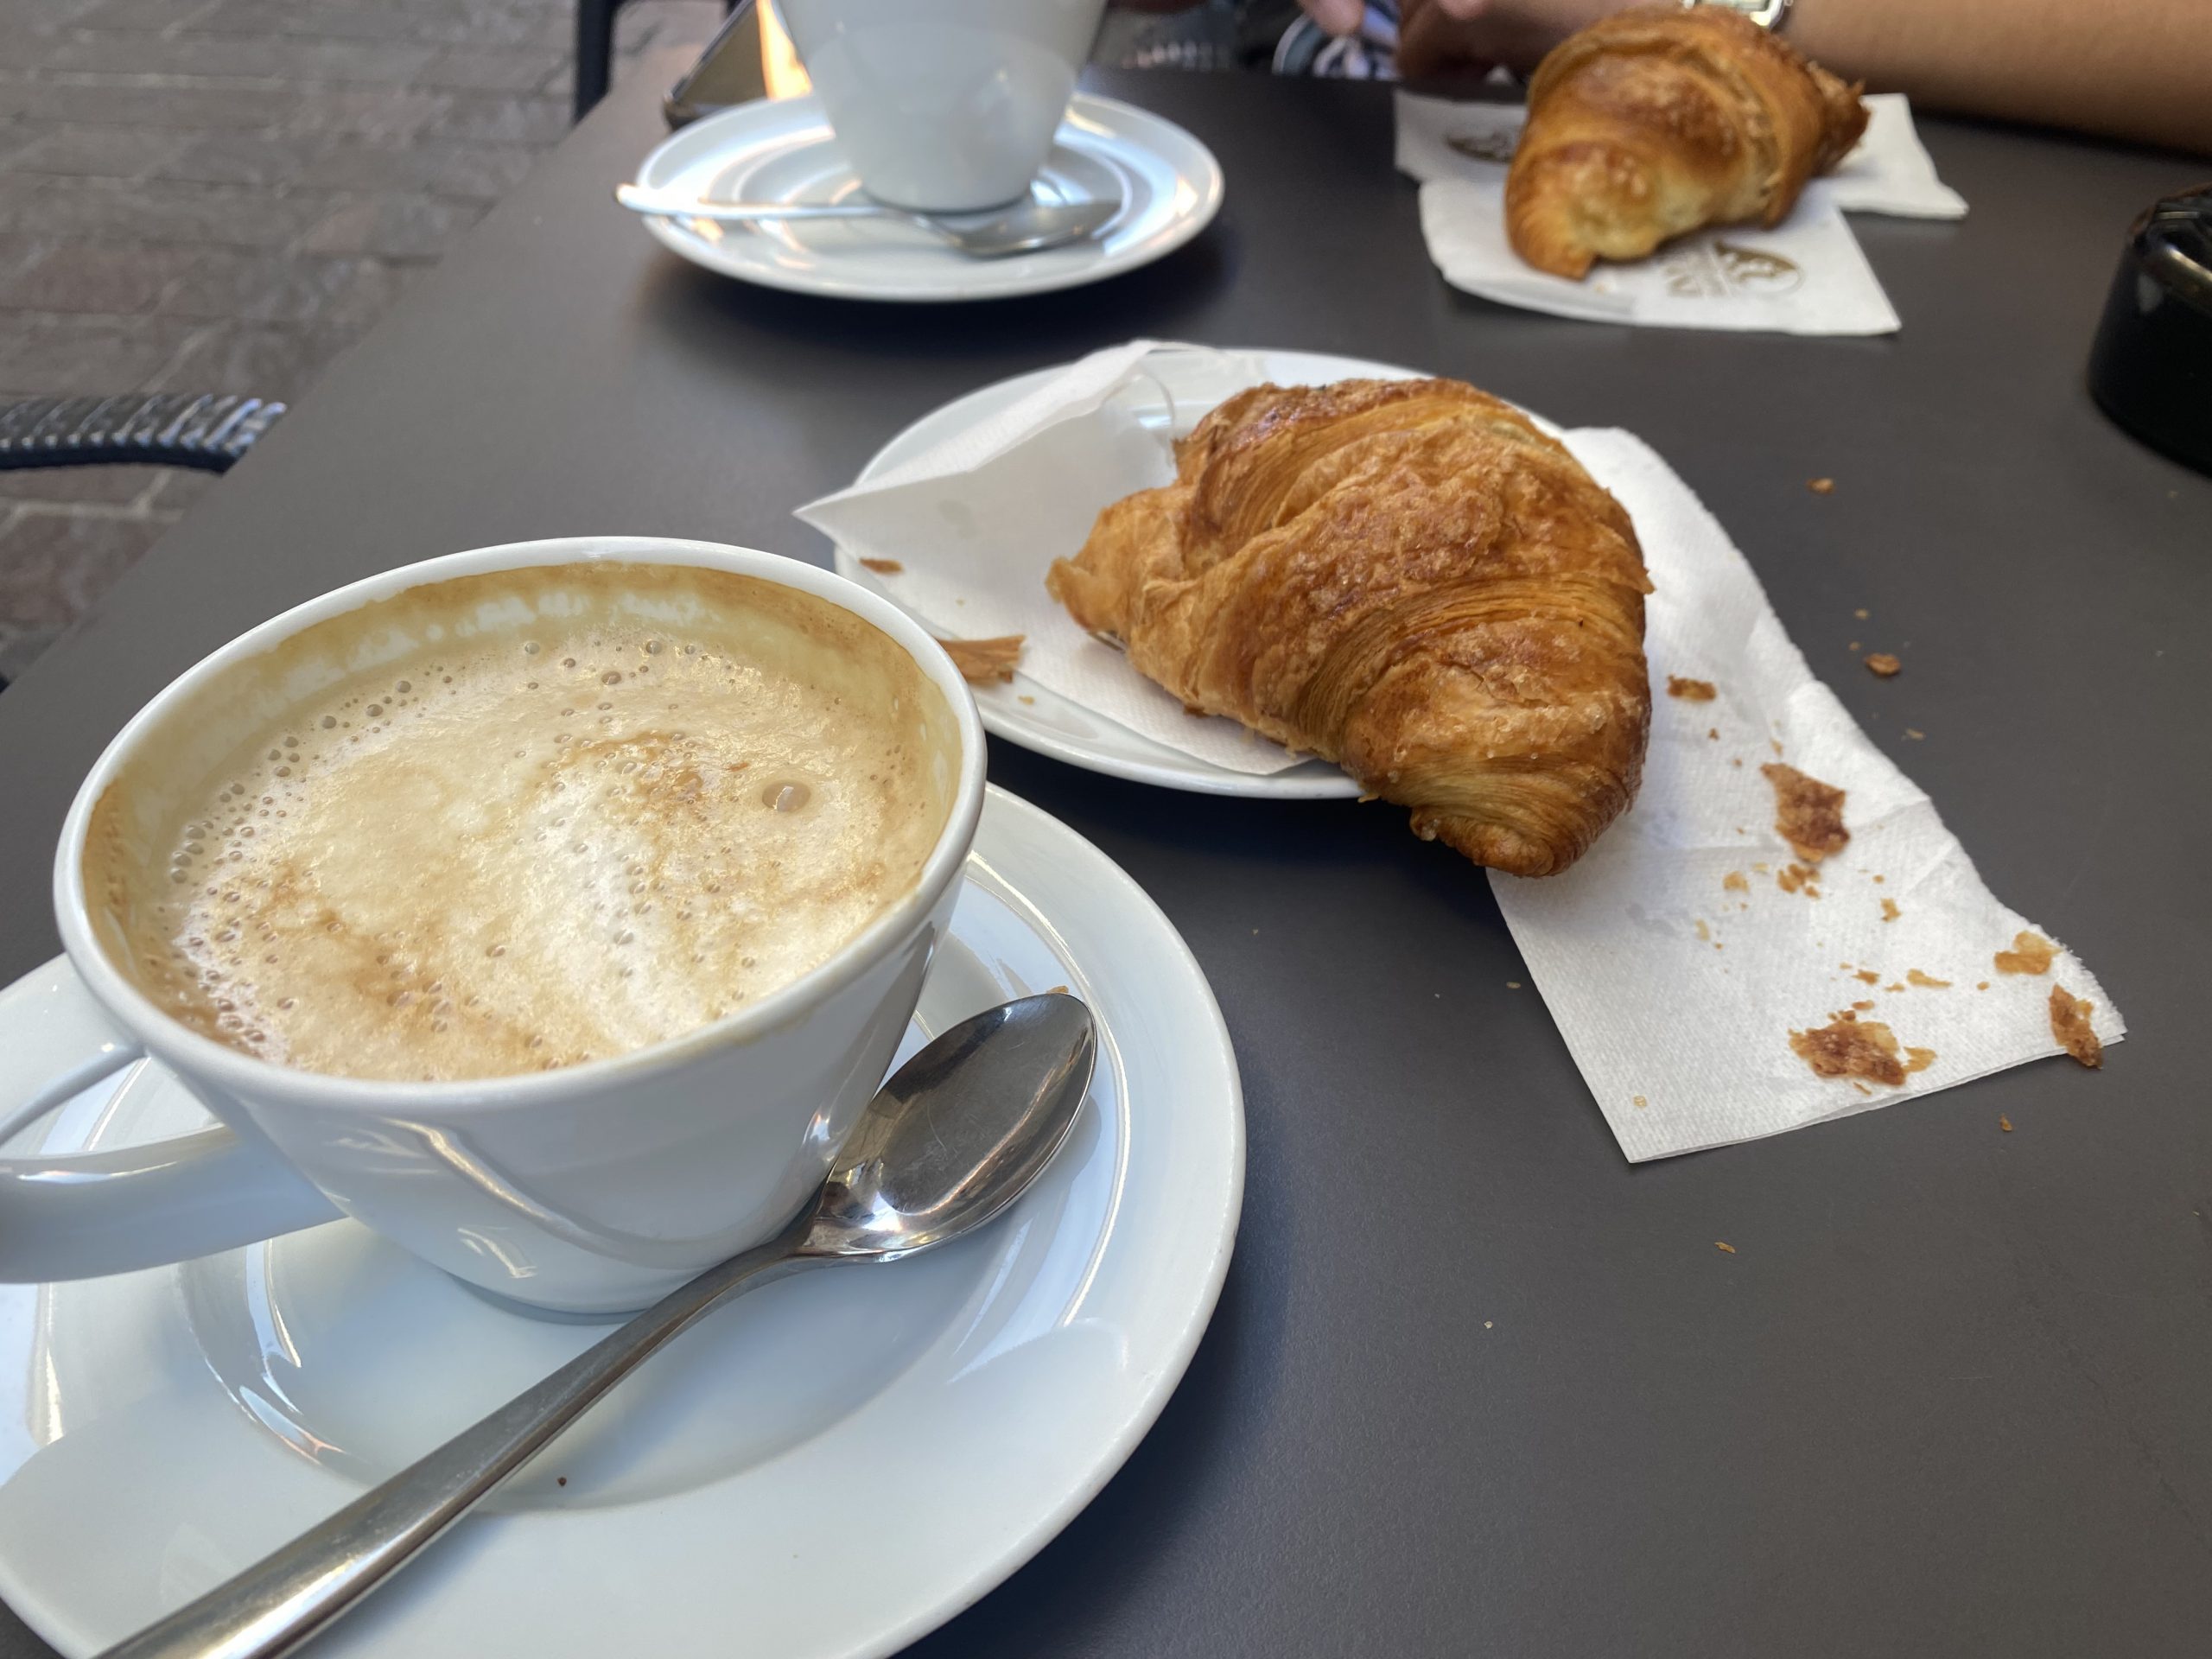 Frothy coffees in white mugs and croissants on plates on a grey table.